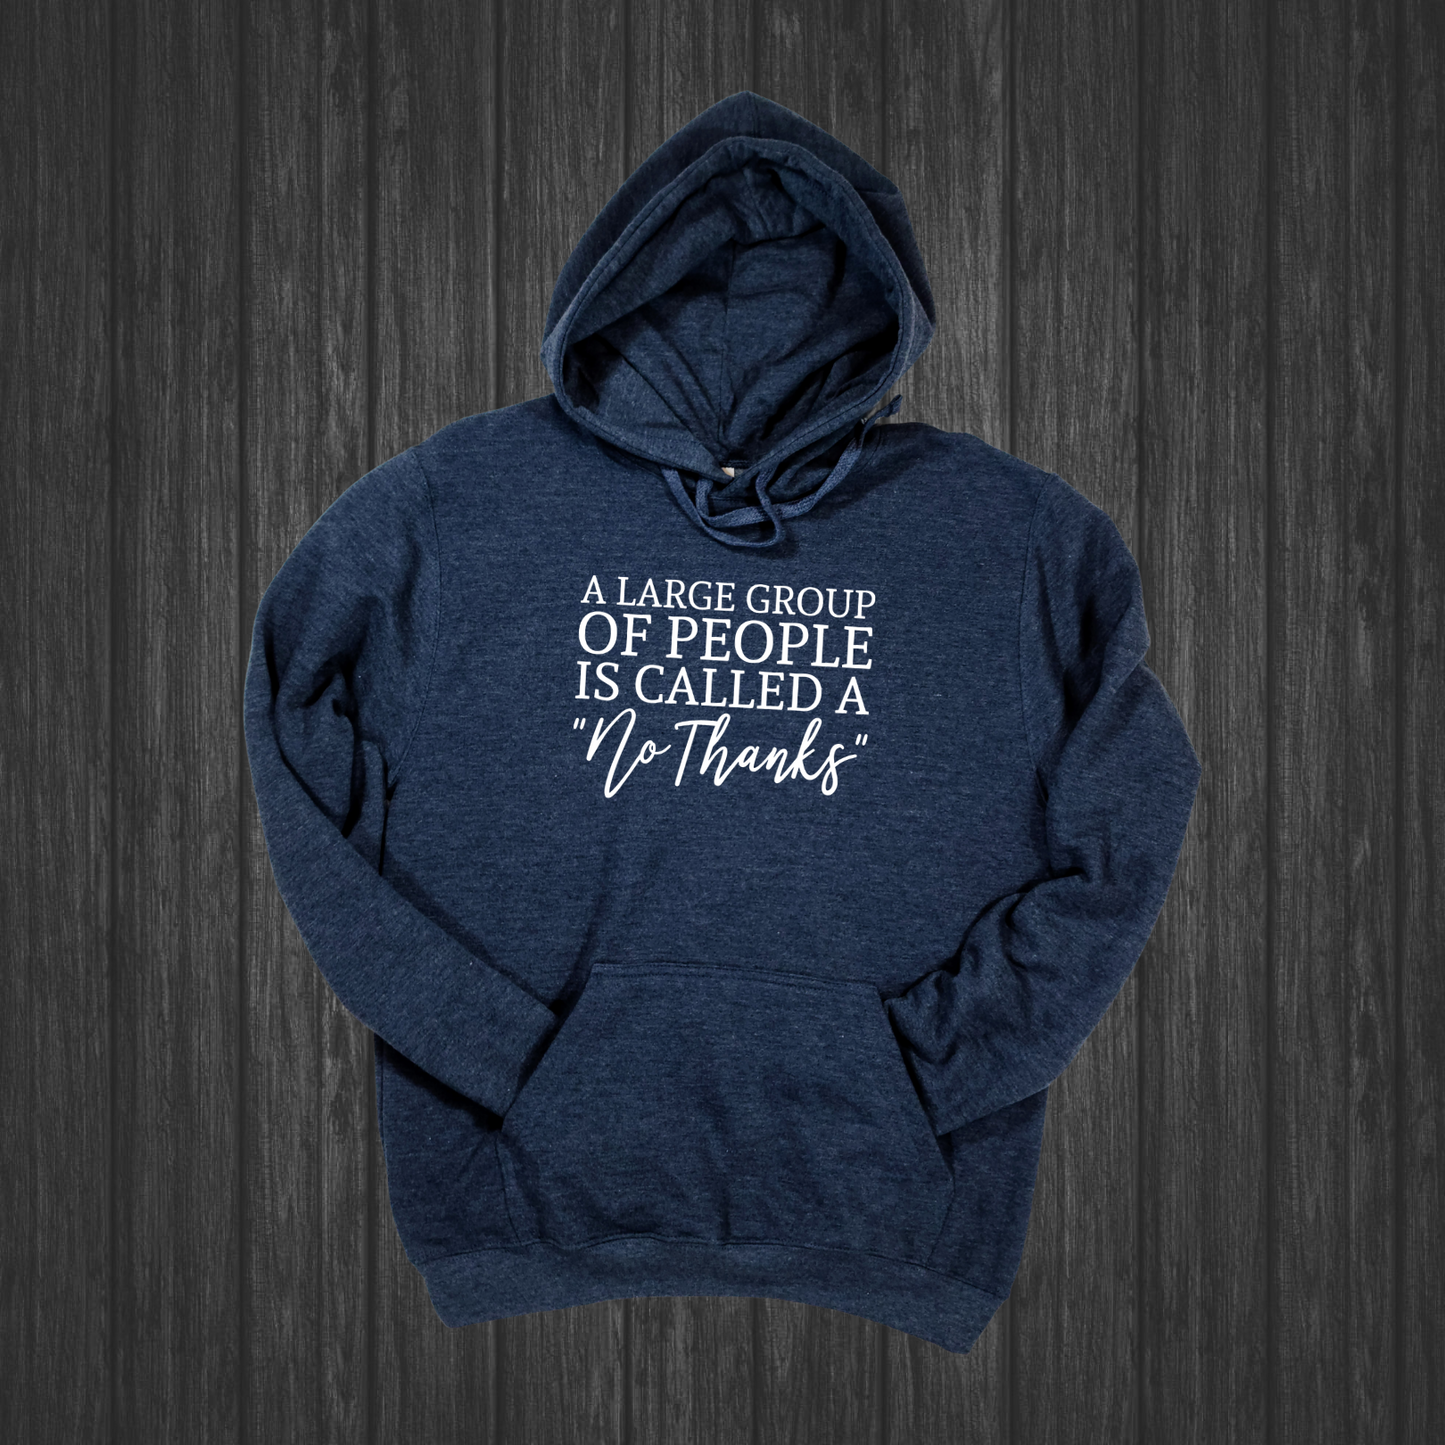 A Large Group of People - Introvert Hoodie